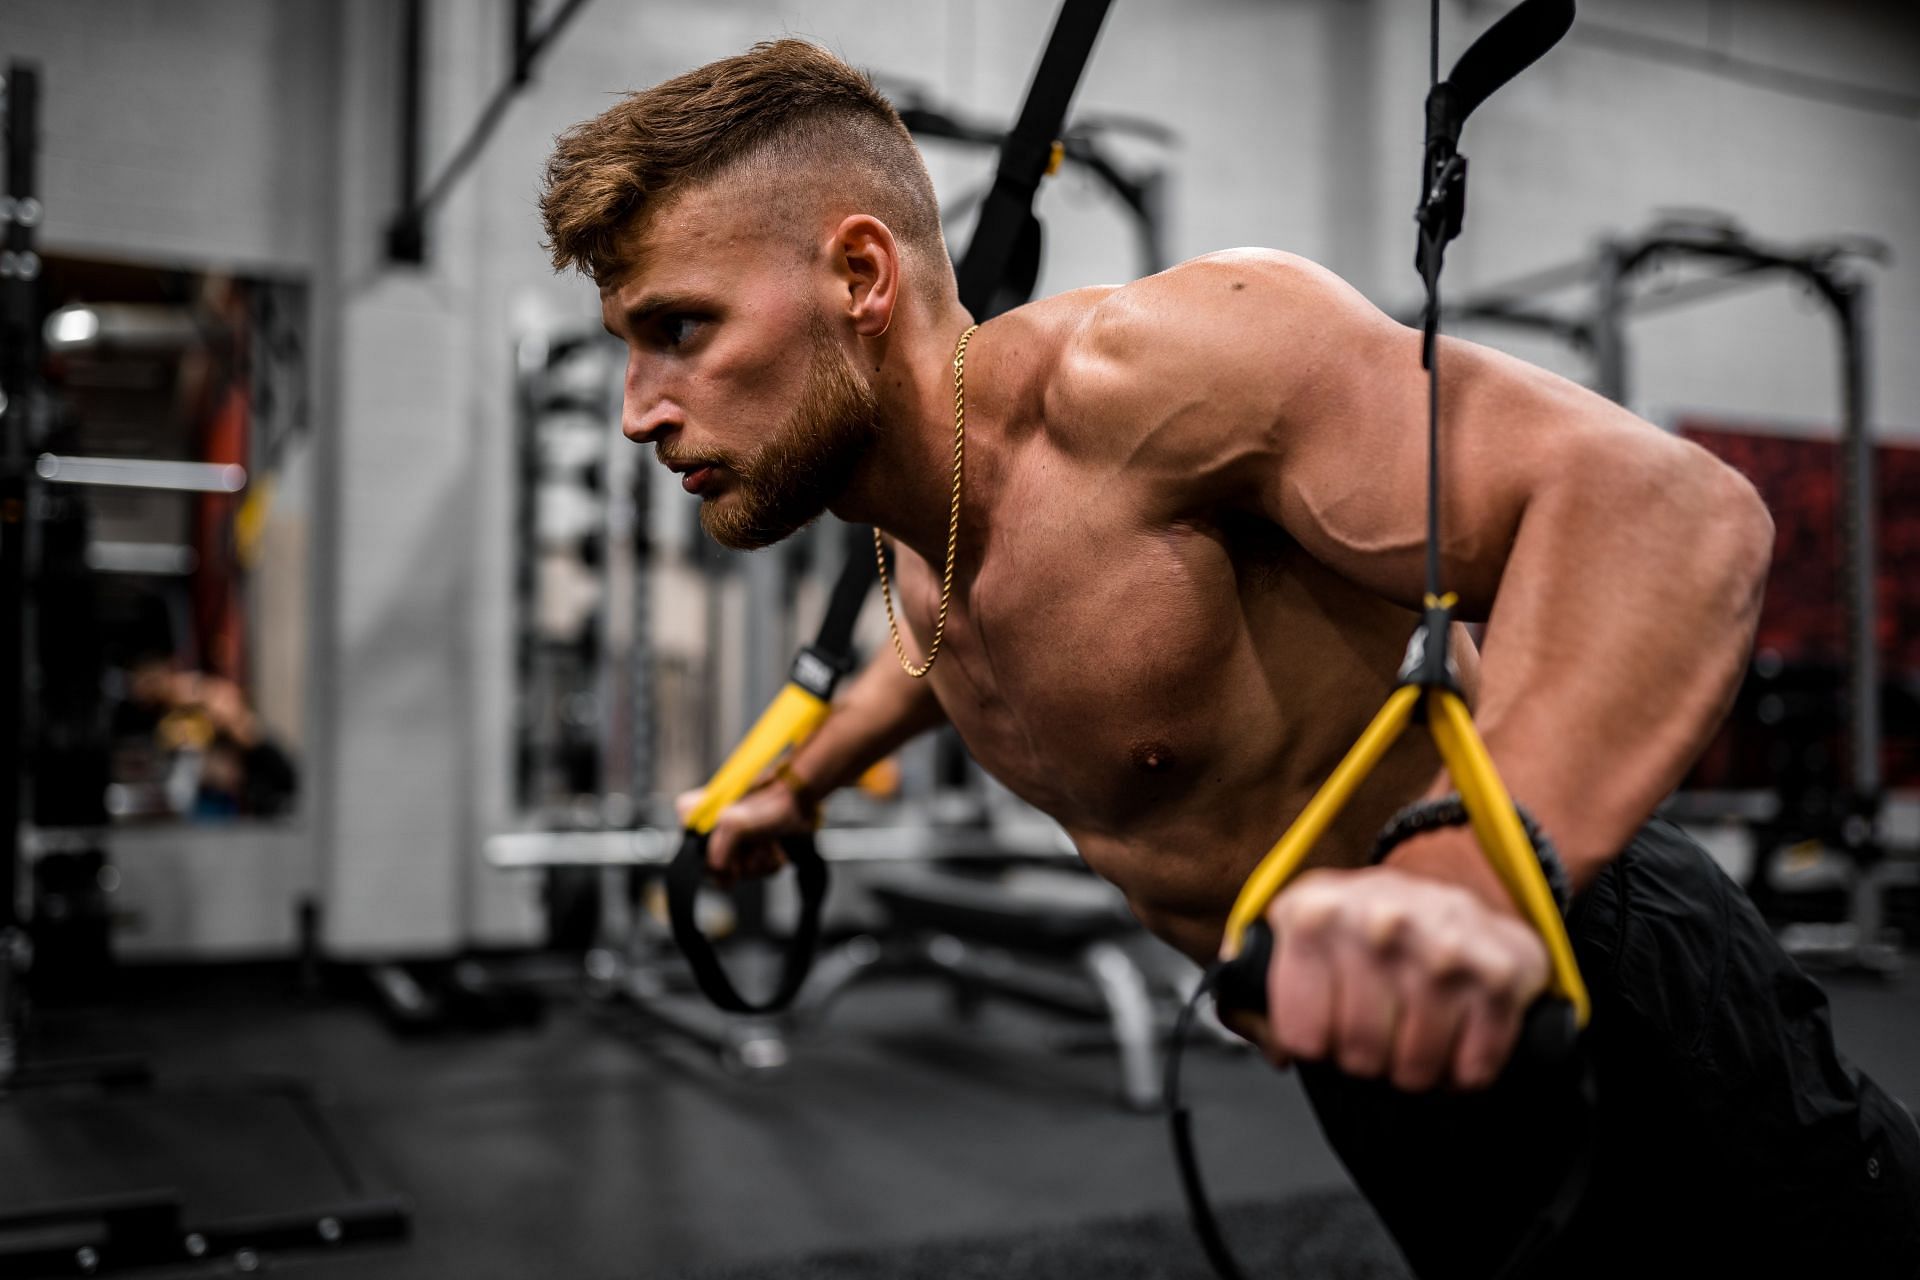 TRX biceps curls is a great way to work out your arms without any fancy equipment. (Image via Unsplash / Anastase Maragos )